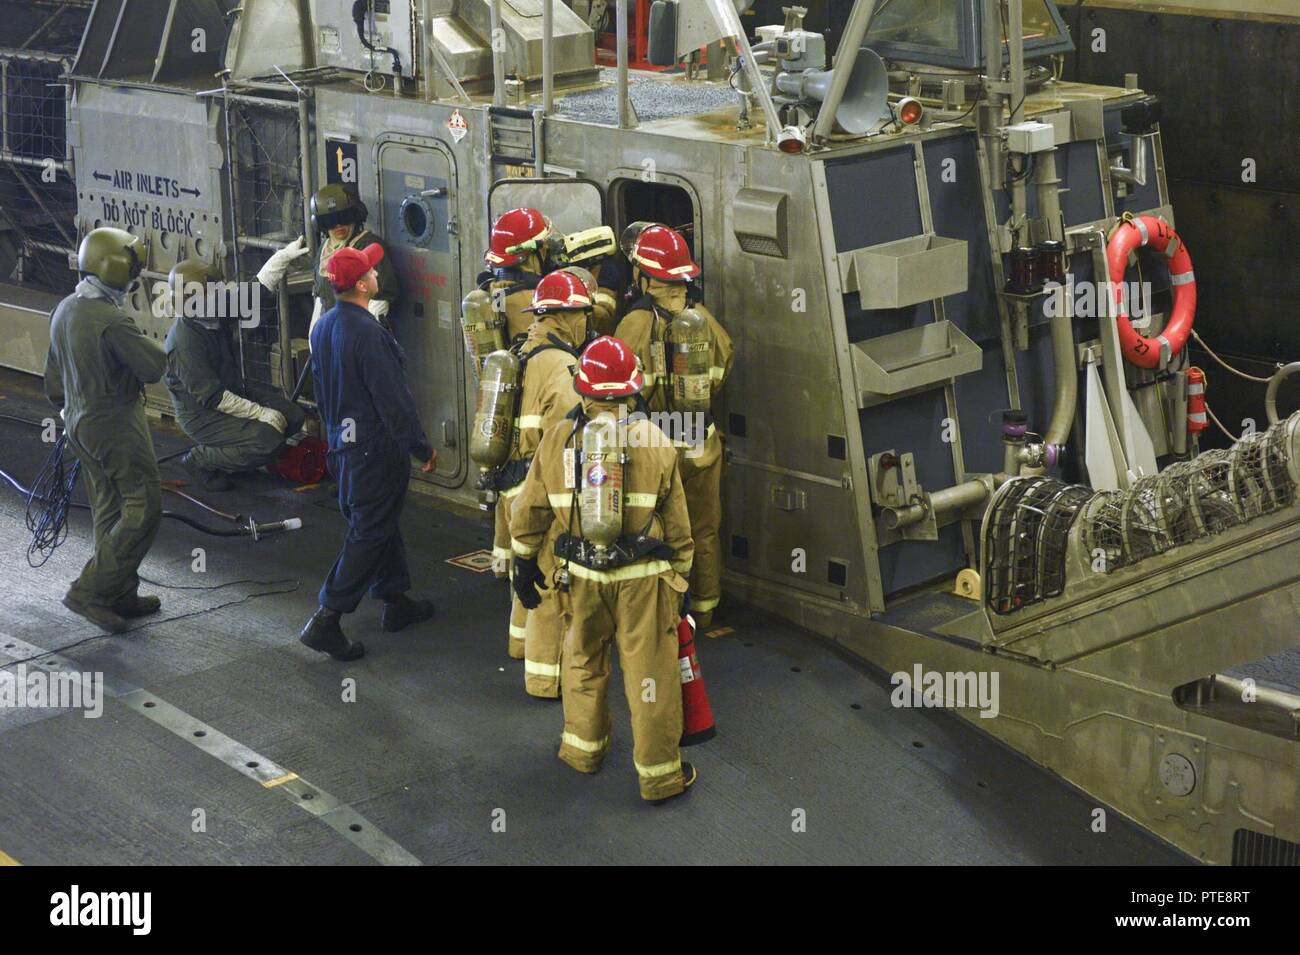 OCEAN (July 15, 2017) Sailors assigned to the Wasp-class amphibious assault ship USS Essex (LHD 2) and Assault Craft Unit (ACU) 5 participate in a fire drill aboard a Landing Craft Air Cushion (LCAC) docked in the ship’s well deck. Essex is underway conducting sea trials off the coast of Southern California. Stock Photo